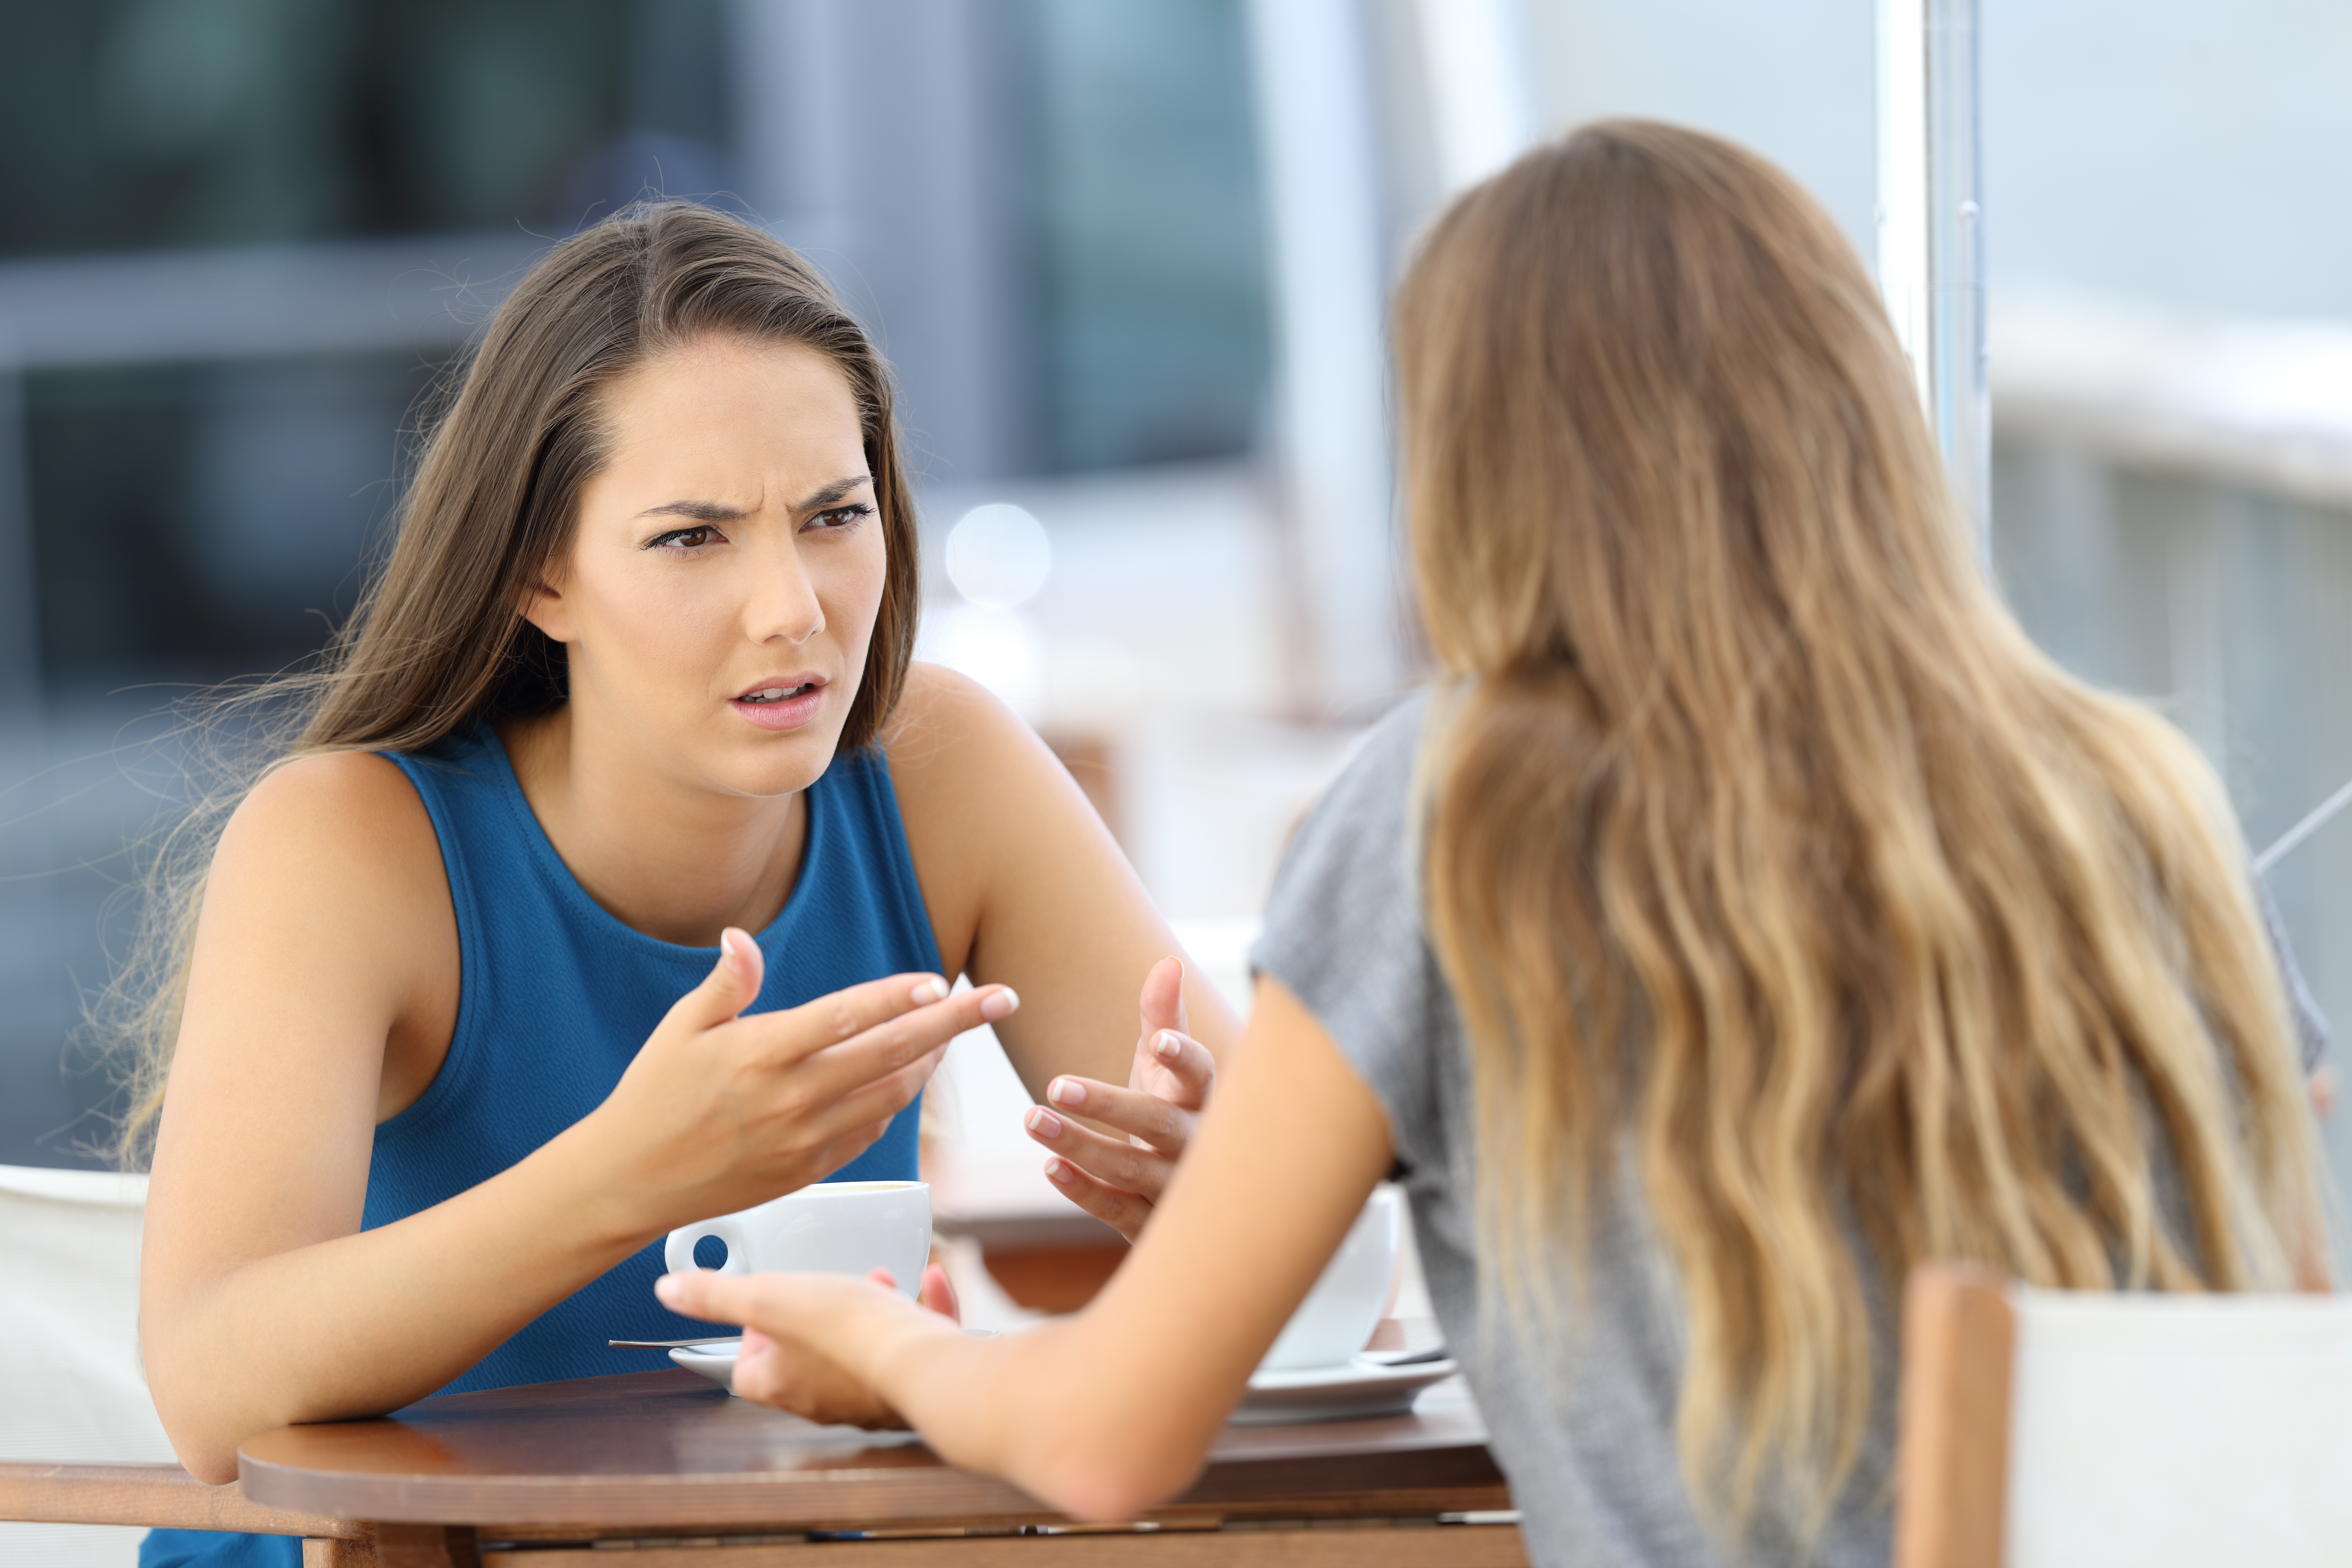 An angry woman talking to another woman | Source: Shutterstock